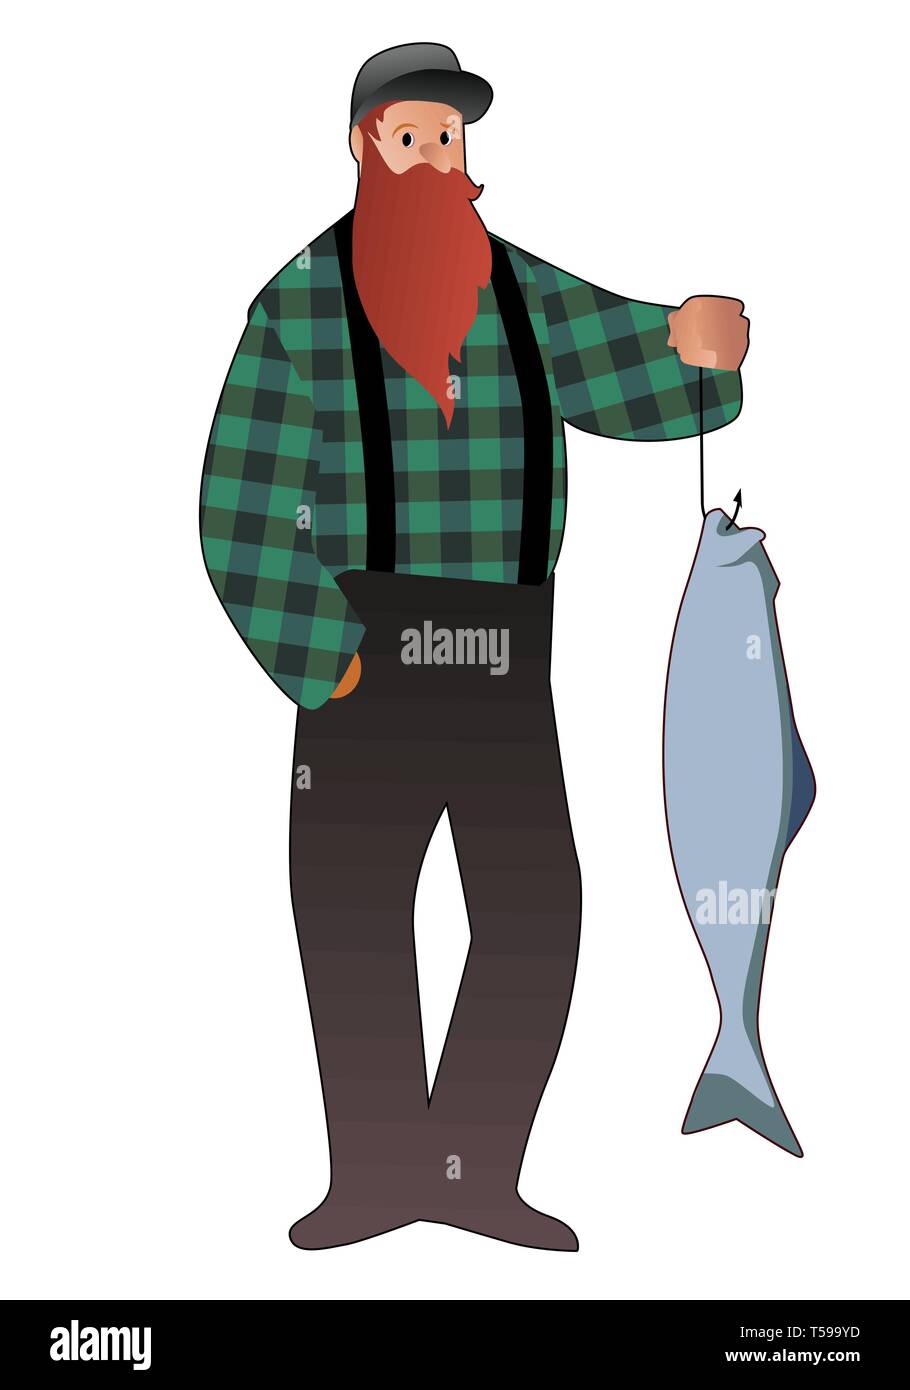 Fisherman Cartoon People Fishing Characters Catching Fish With Rods While  Standing On Shore Of Lake And